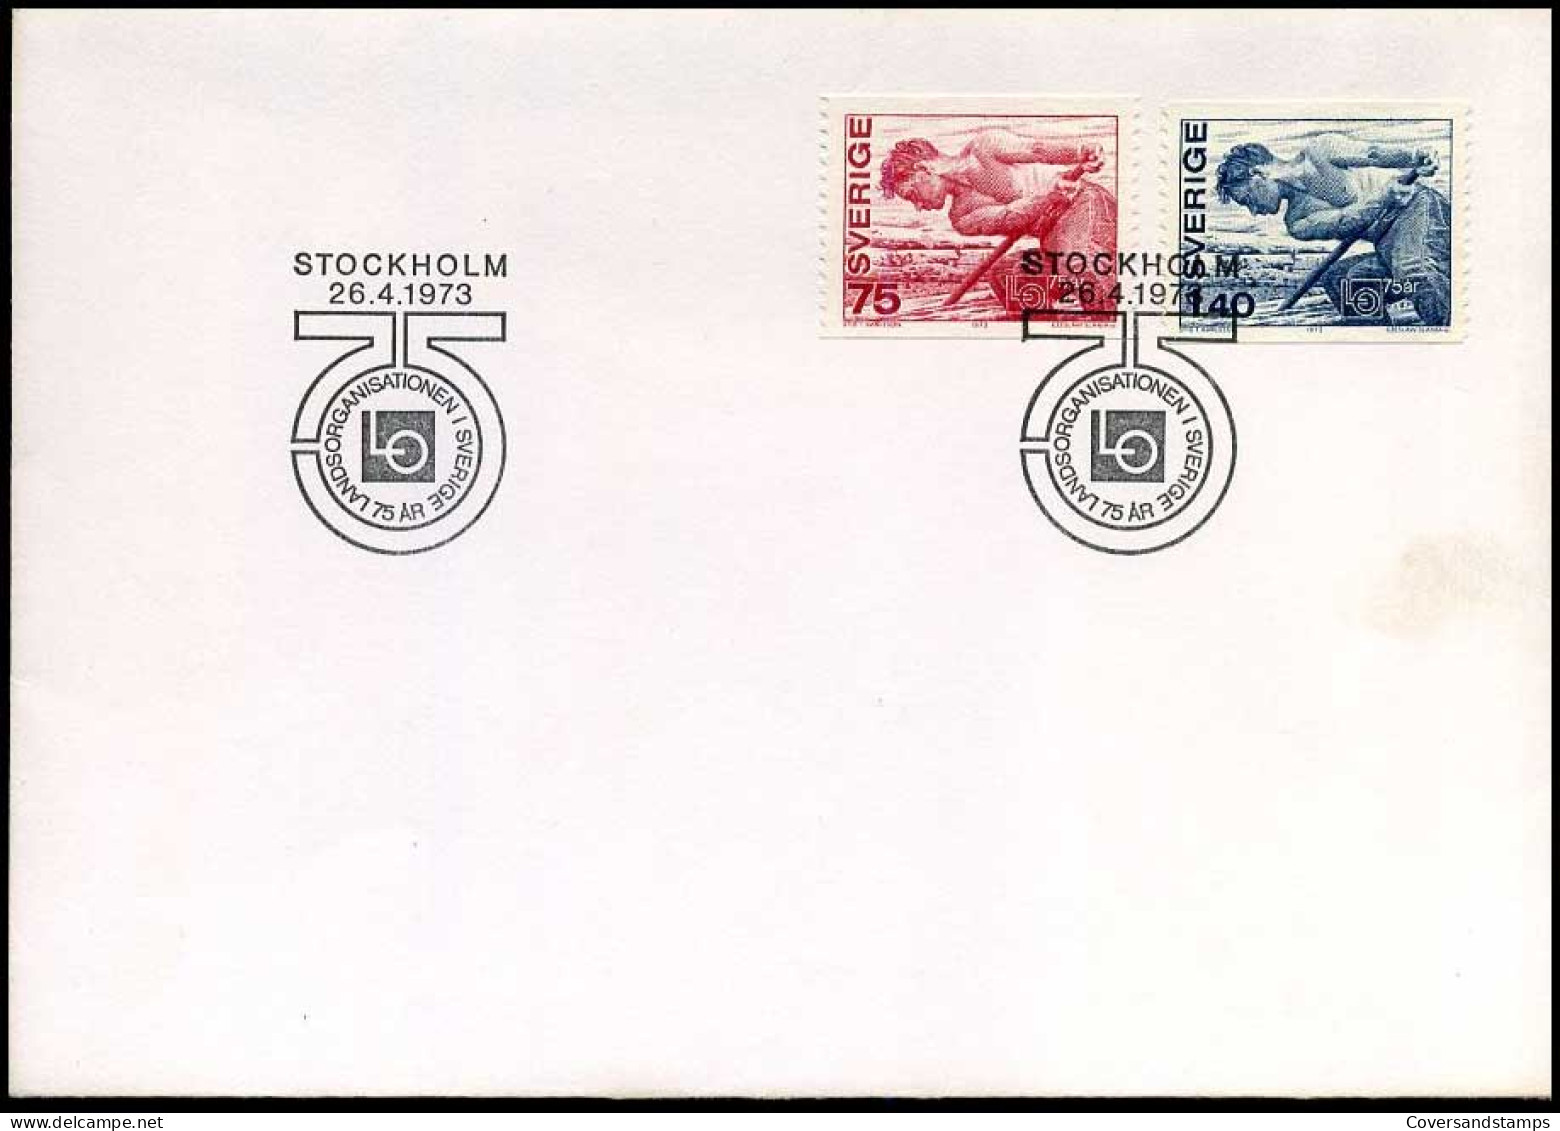 Sweden - FDC -  - FDC